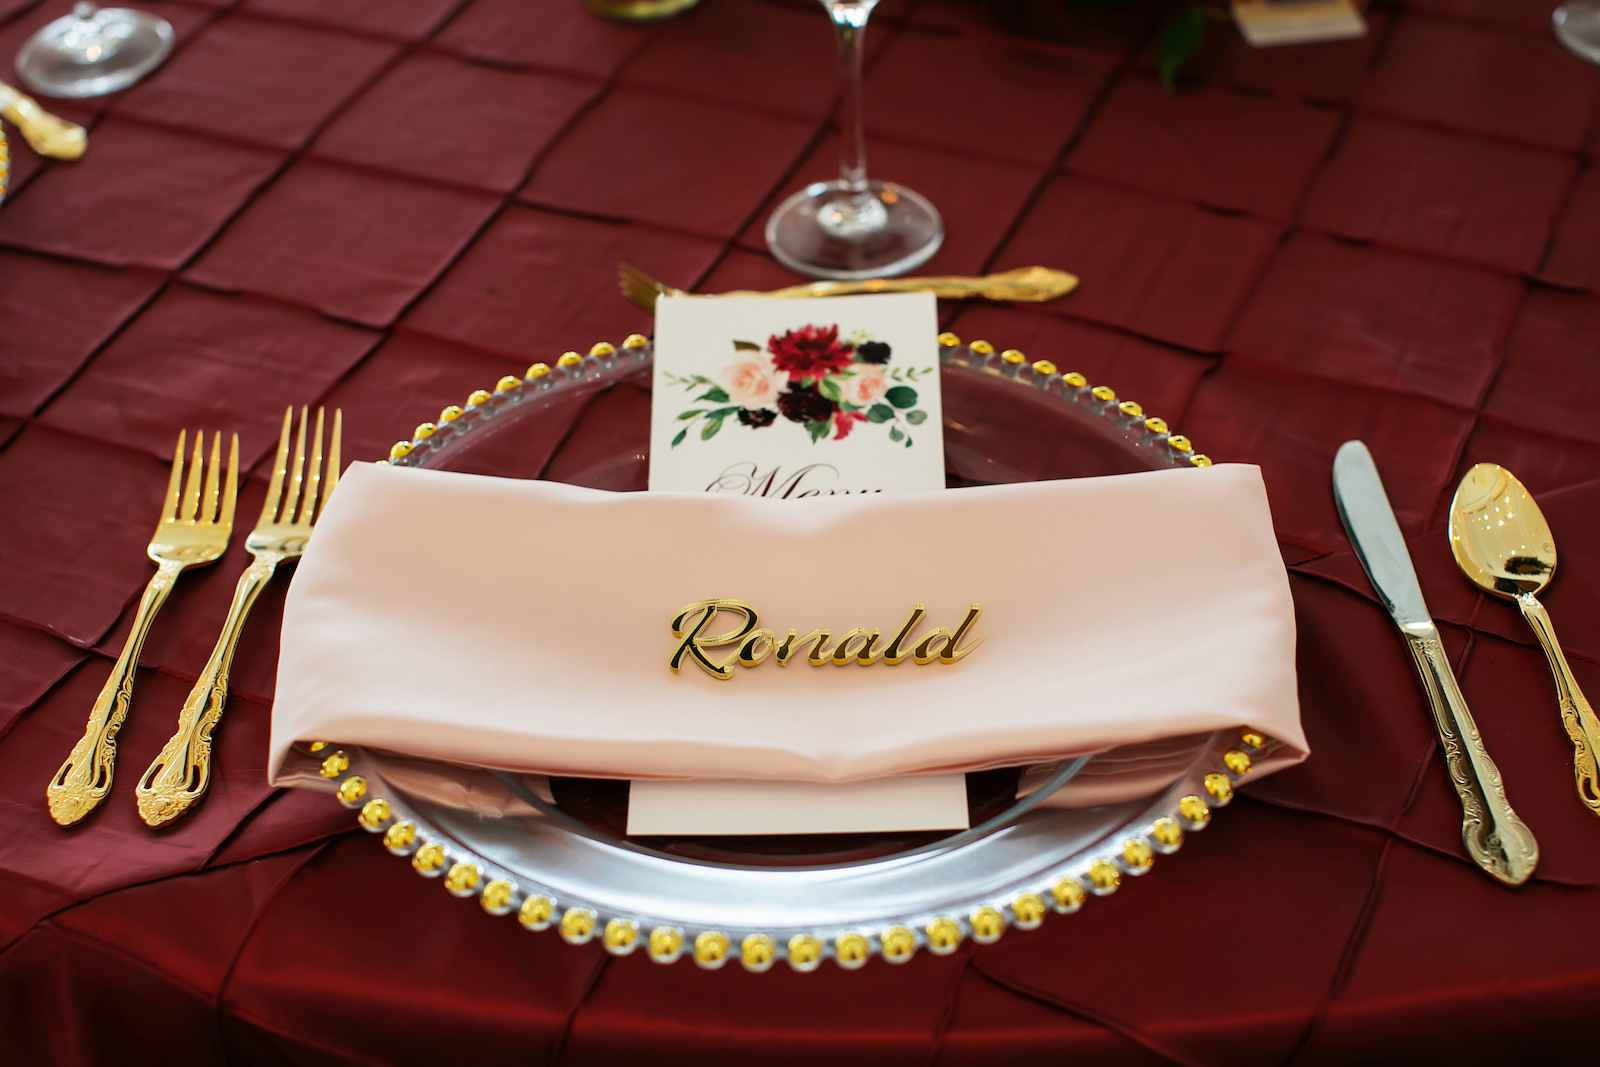 Elegant Garden Burgundy Ballroom Wedding Reception Decor, Burgundy Table Linen, Gold Chargers and Flatware with Lasercut Name Place Setting| St. Petersburg Rentals Outside the Box Event Rentals